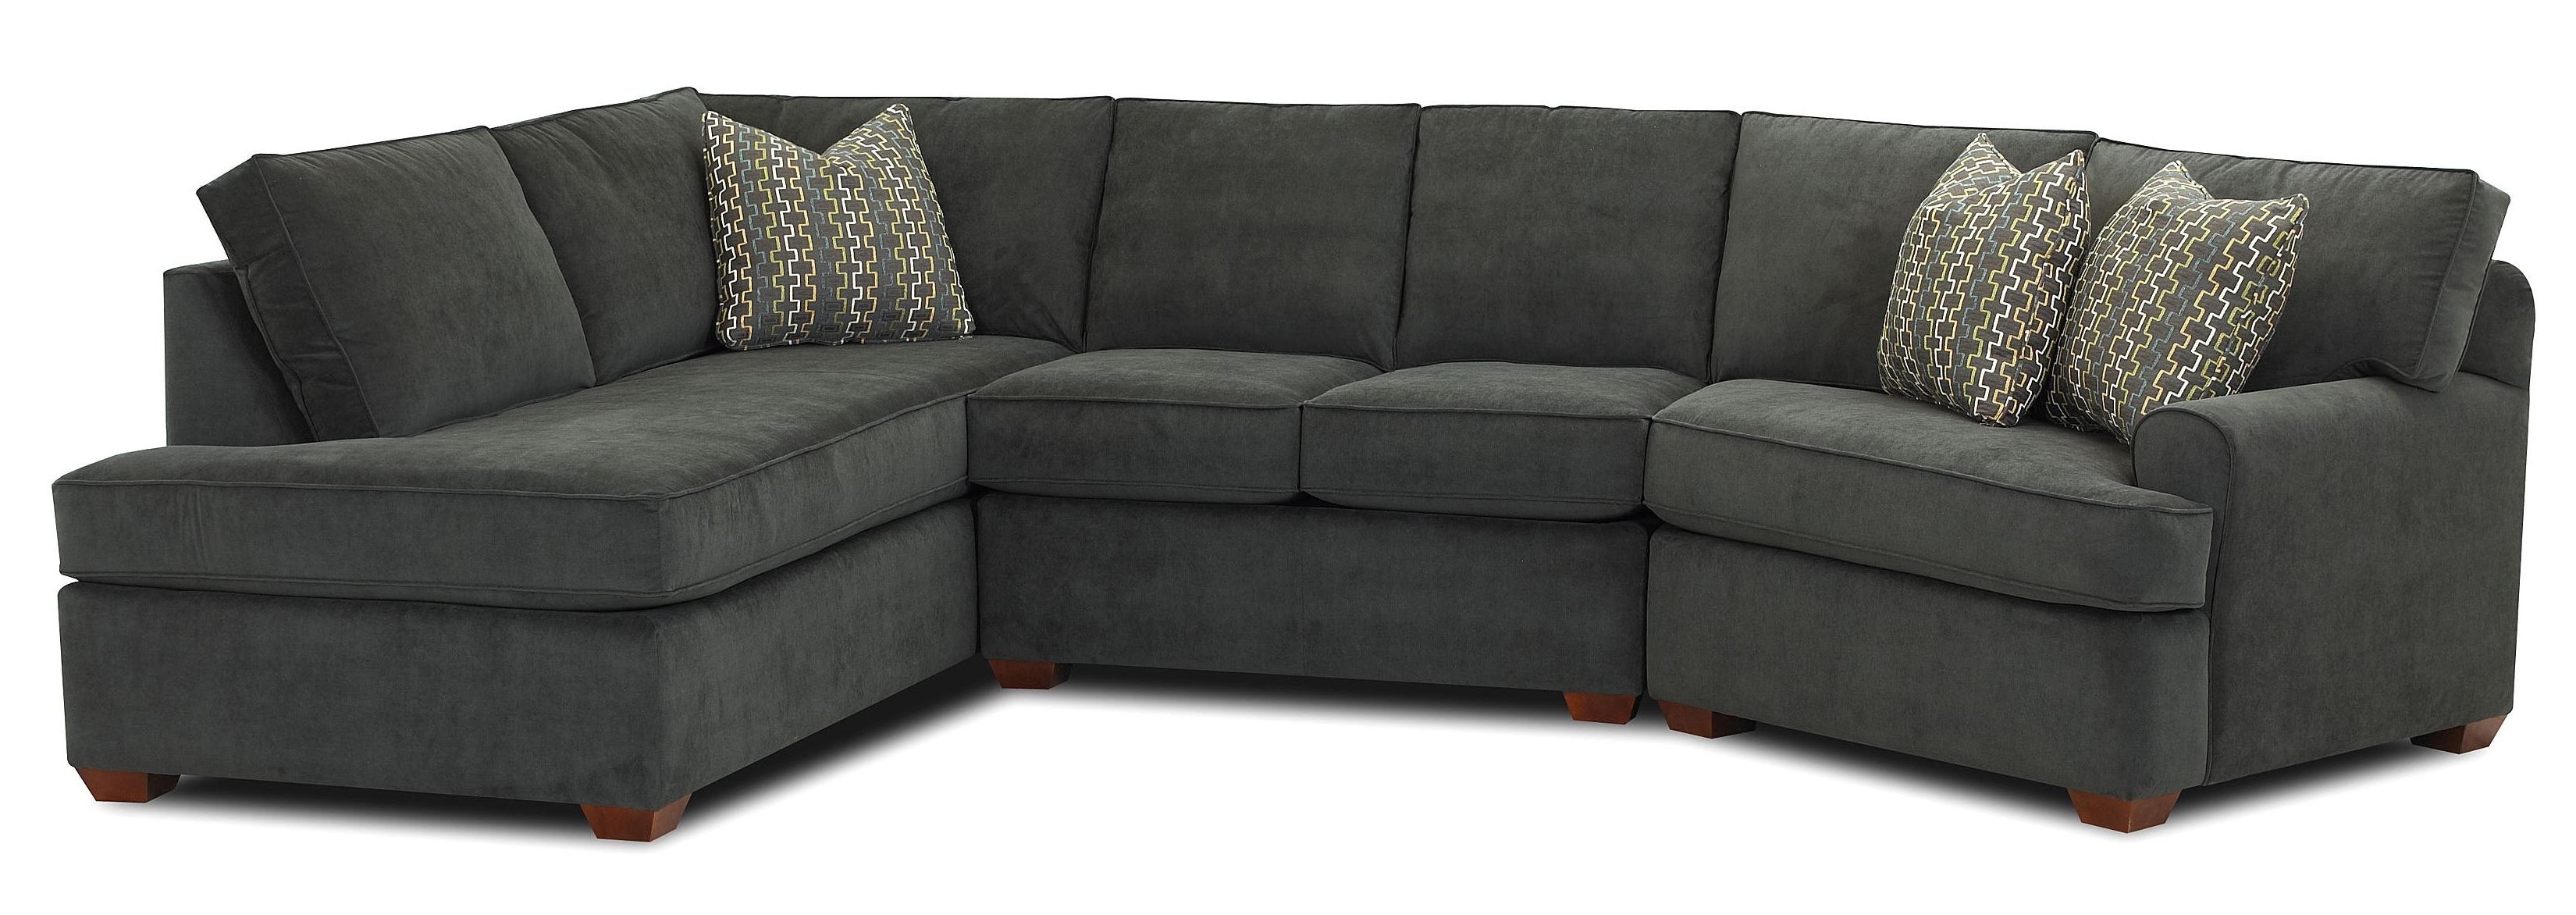 Recent Right Facing Chaise Sectionals Inside Sectional Sofa With Right Facing Sofa Chaiseklaussner (View 1 of 15)